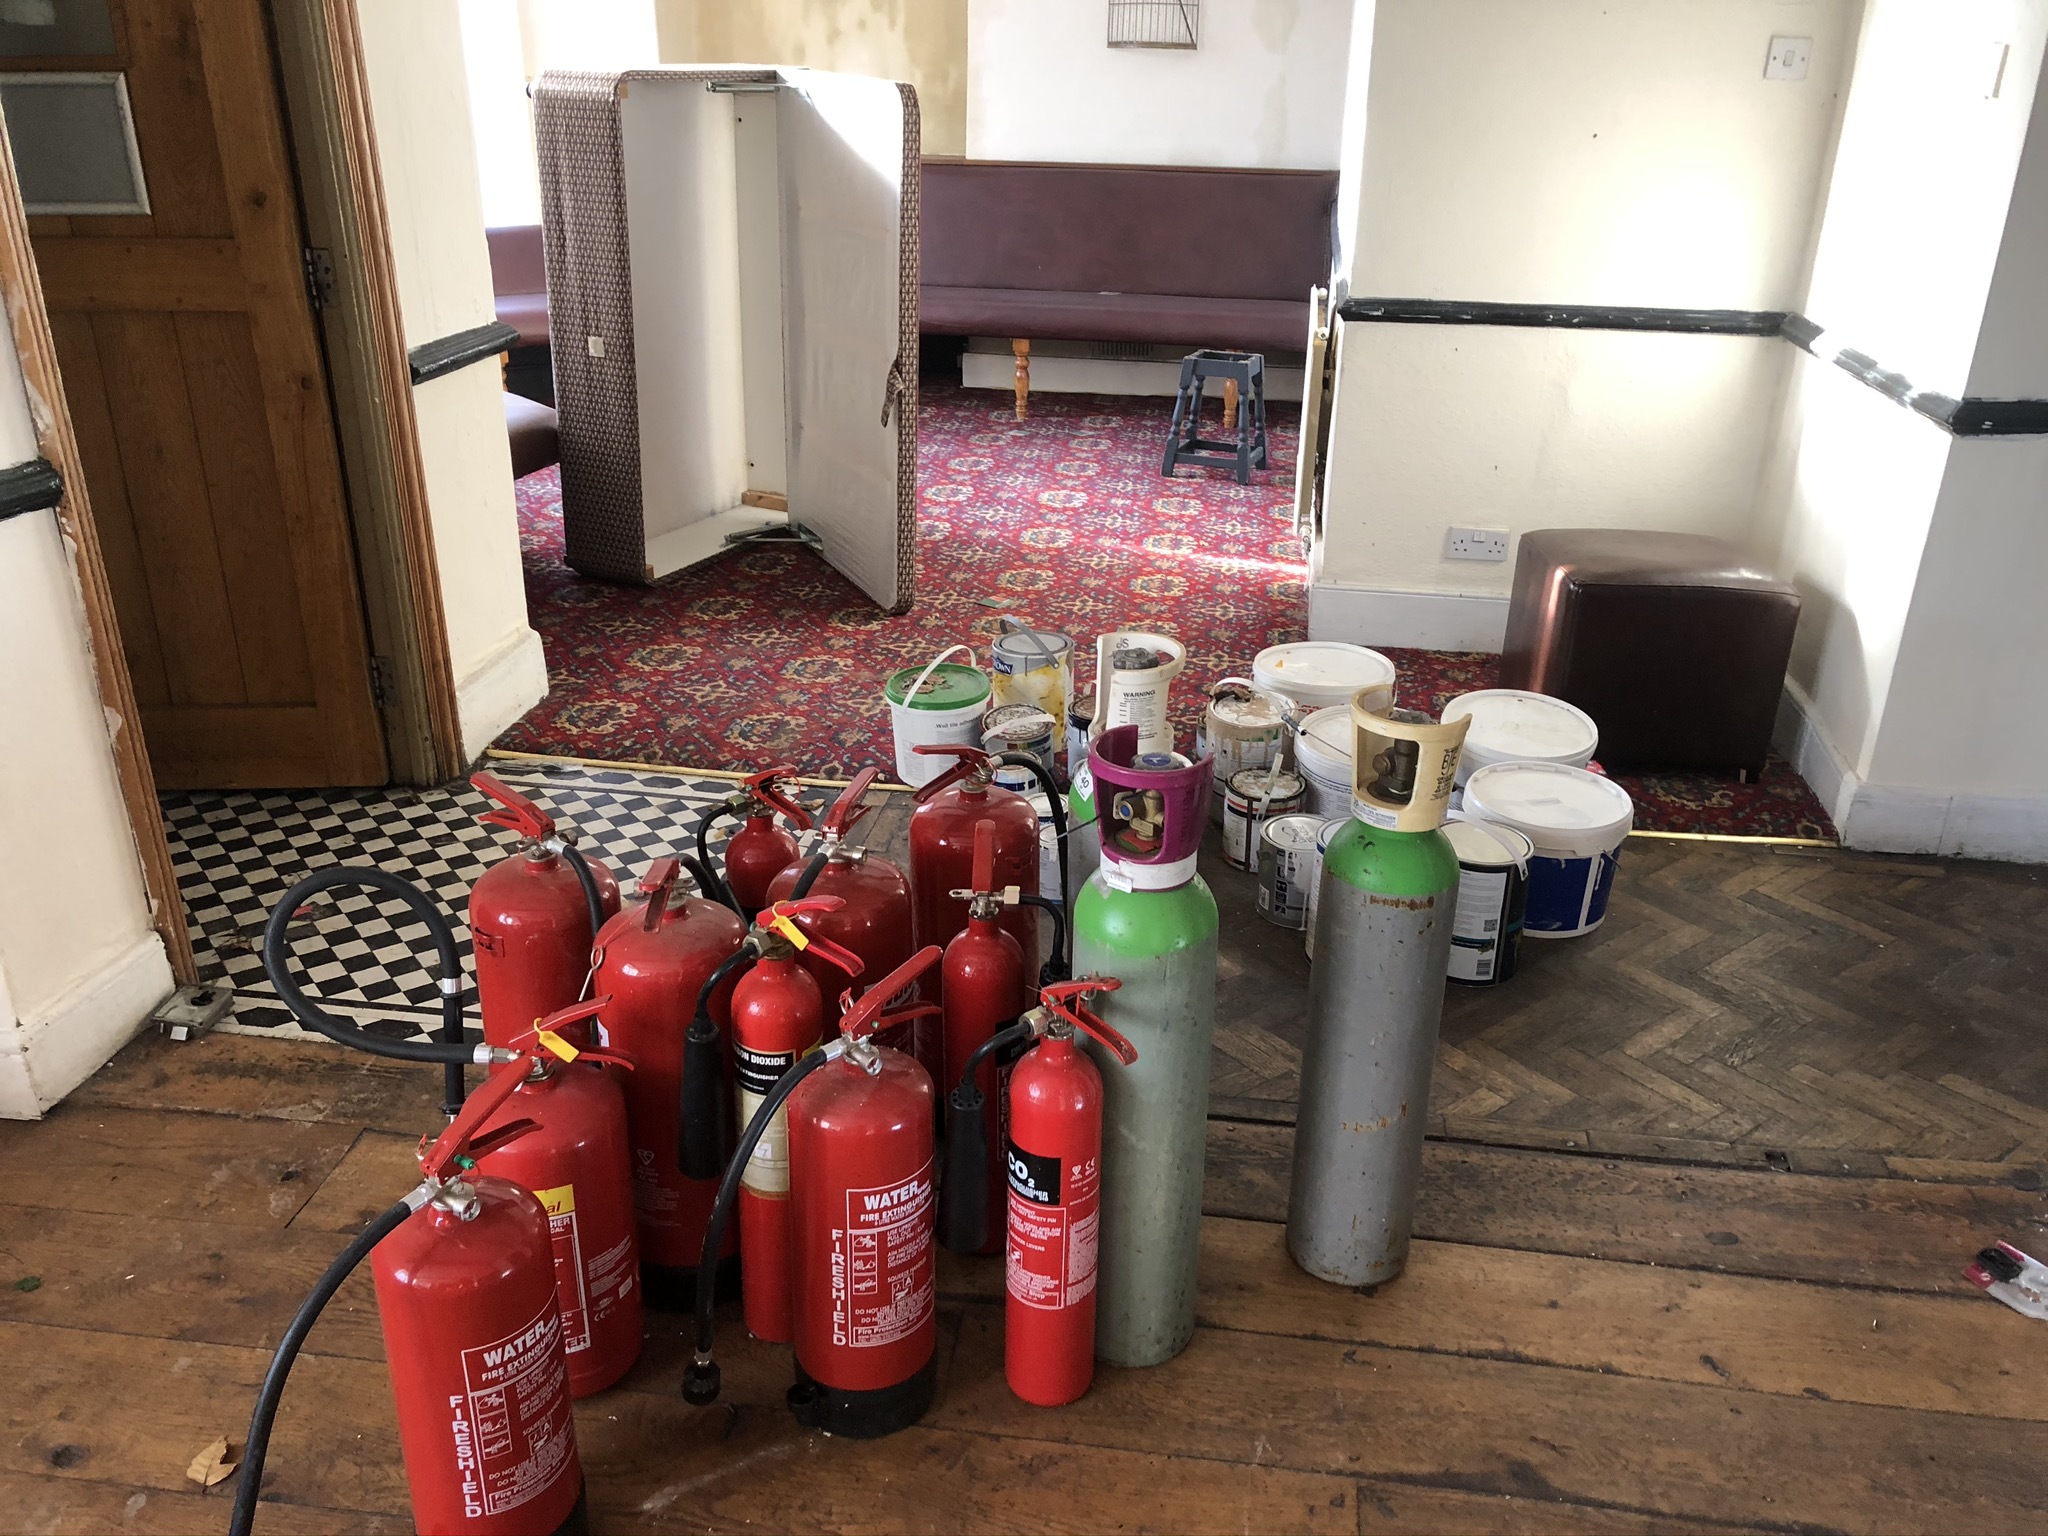 A pile of fire extinguishers in the main room of the ground floor